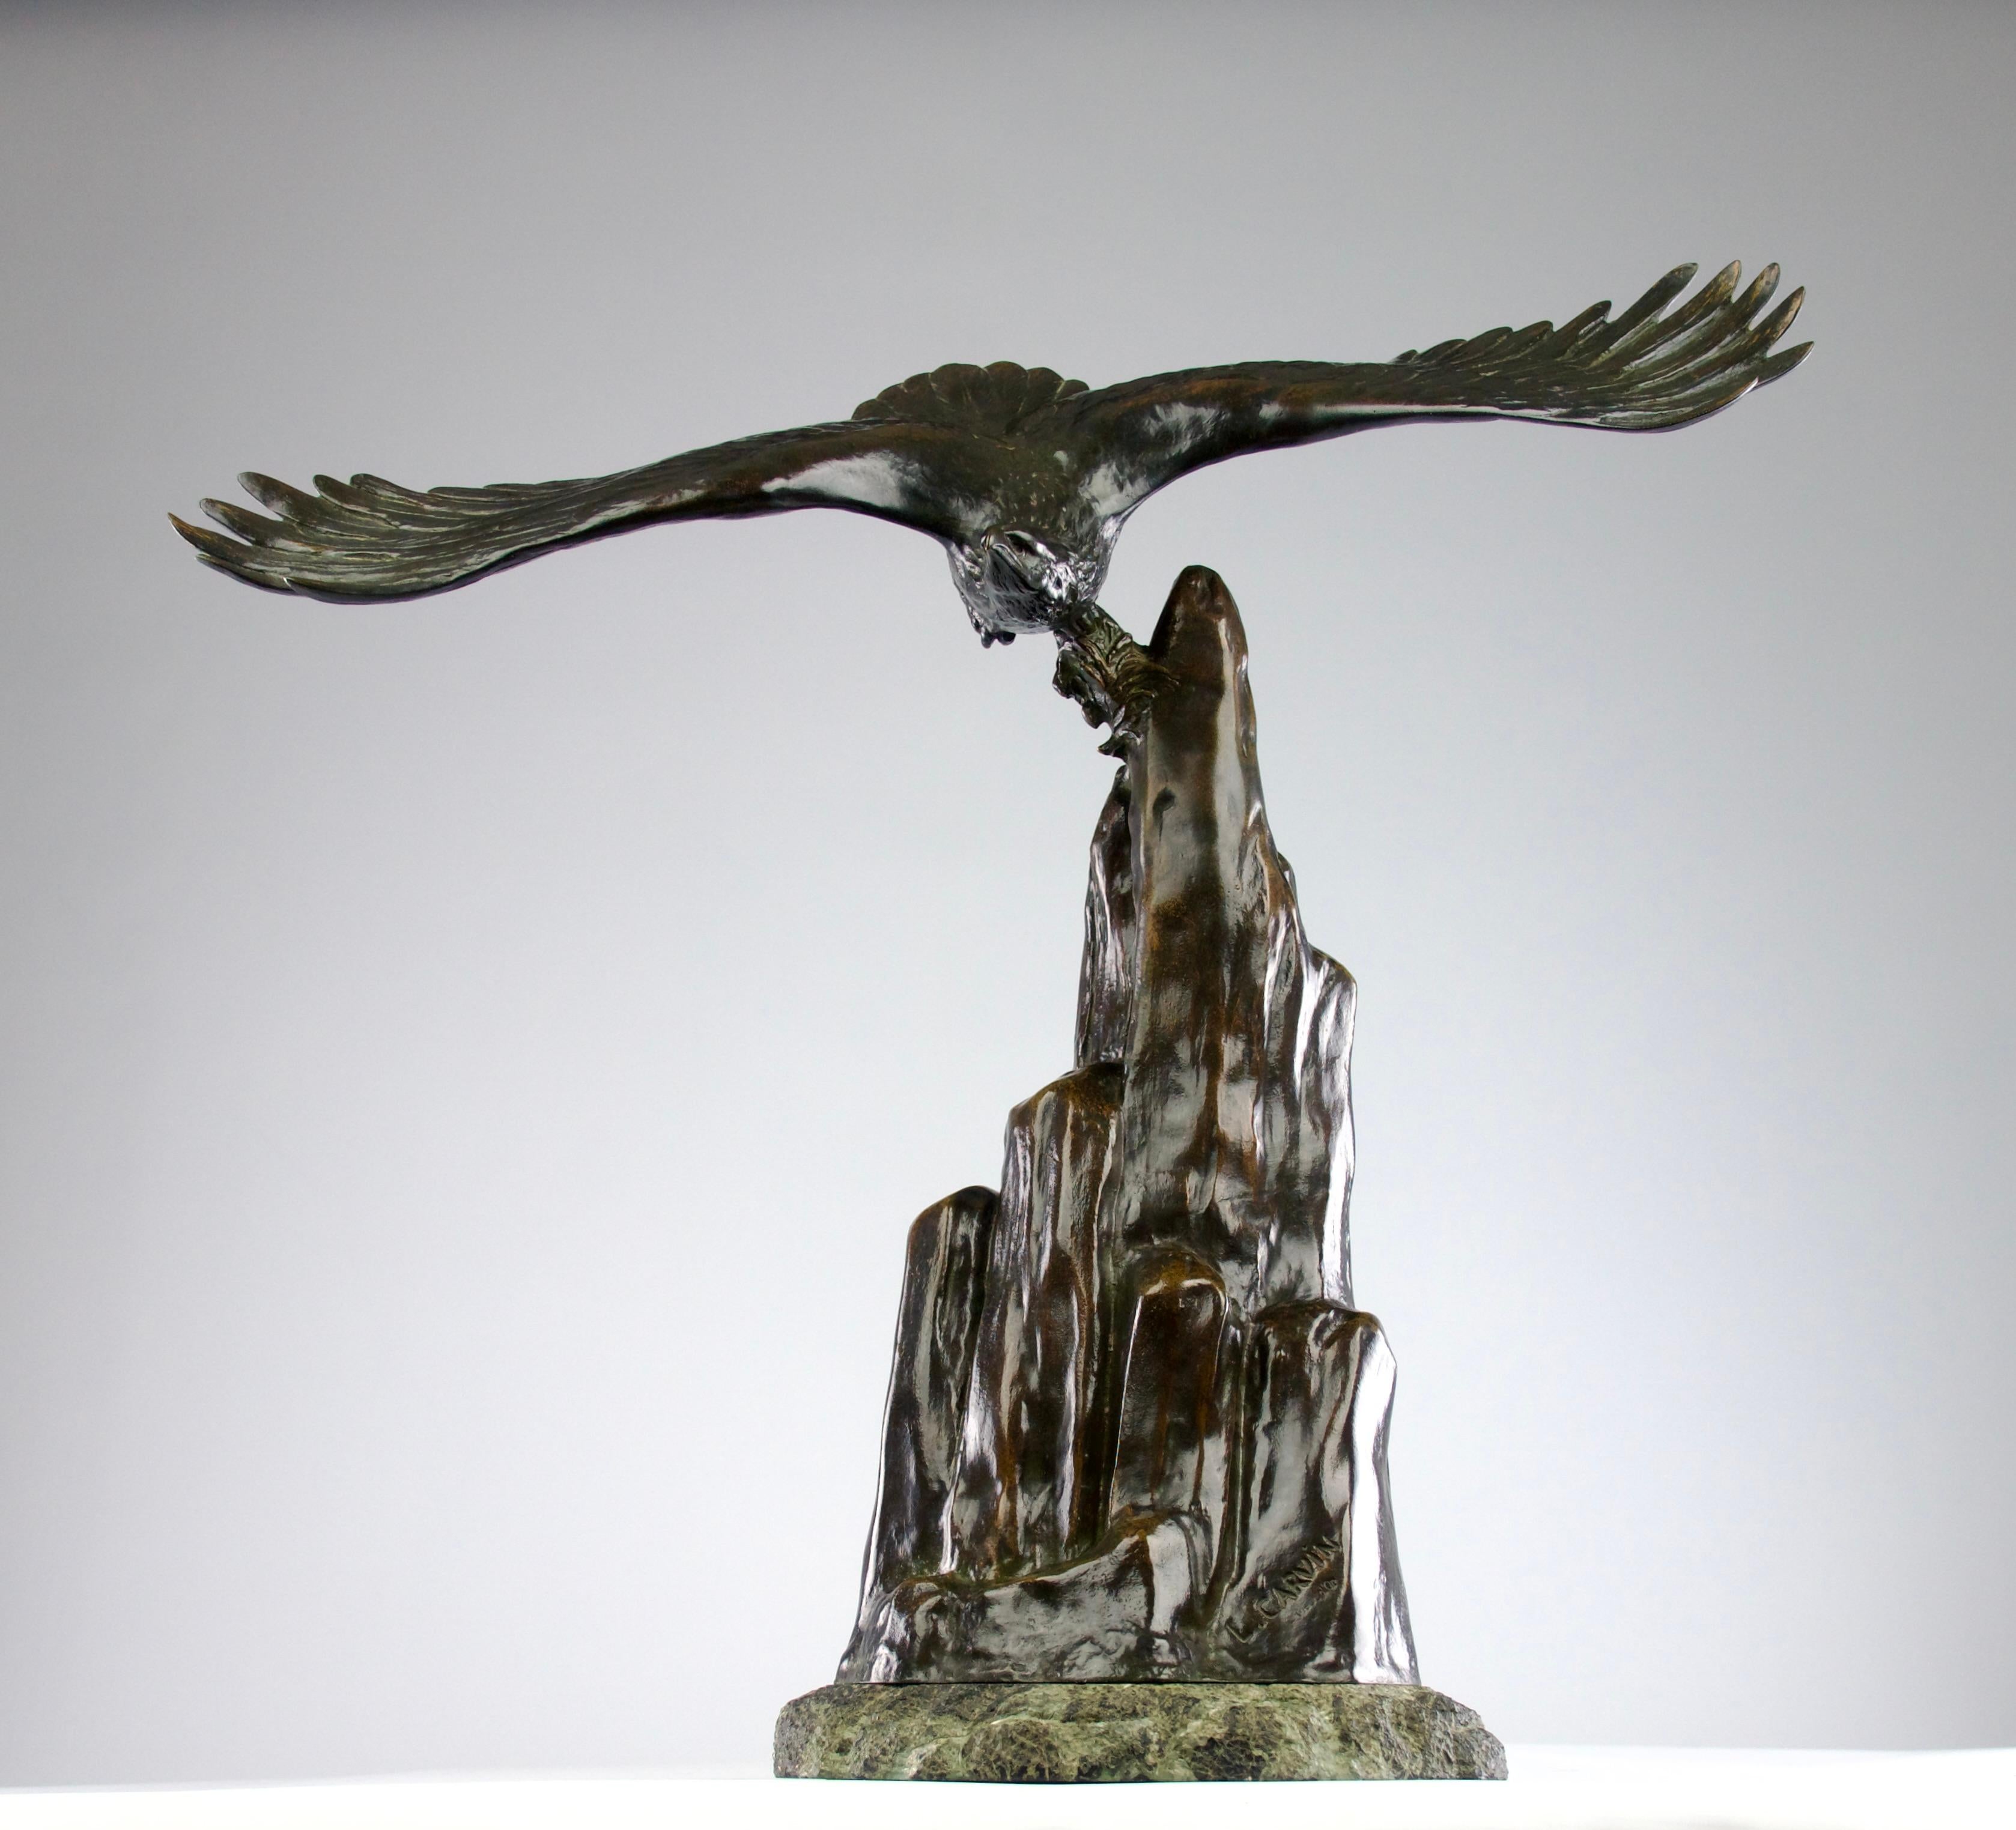 Absolutely exquisite bronze sculpture by Louis-Albert Carvin edited by the R. Patrouilleau foundry in 1920s France. Vivid representation of an eagle launching from a mountain. The sculpture is signed and marked by the artist and editor. It also is